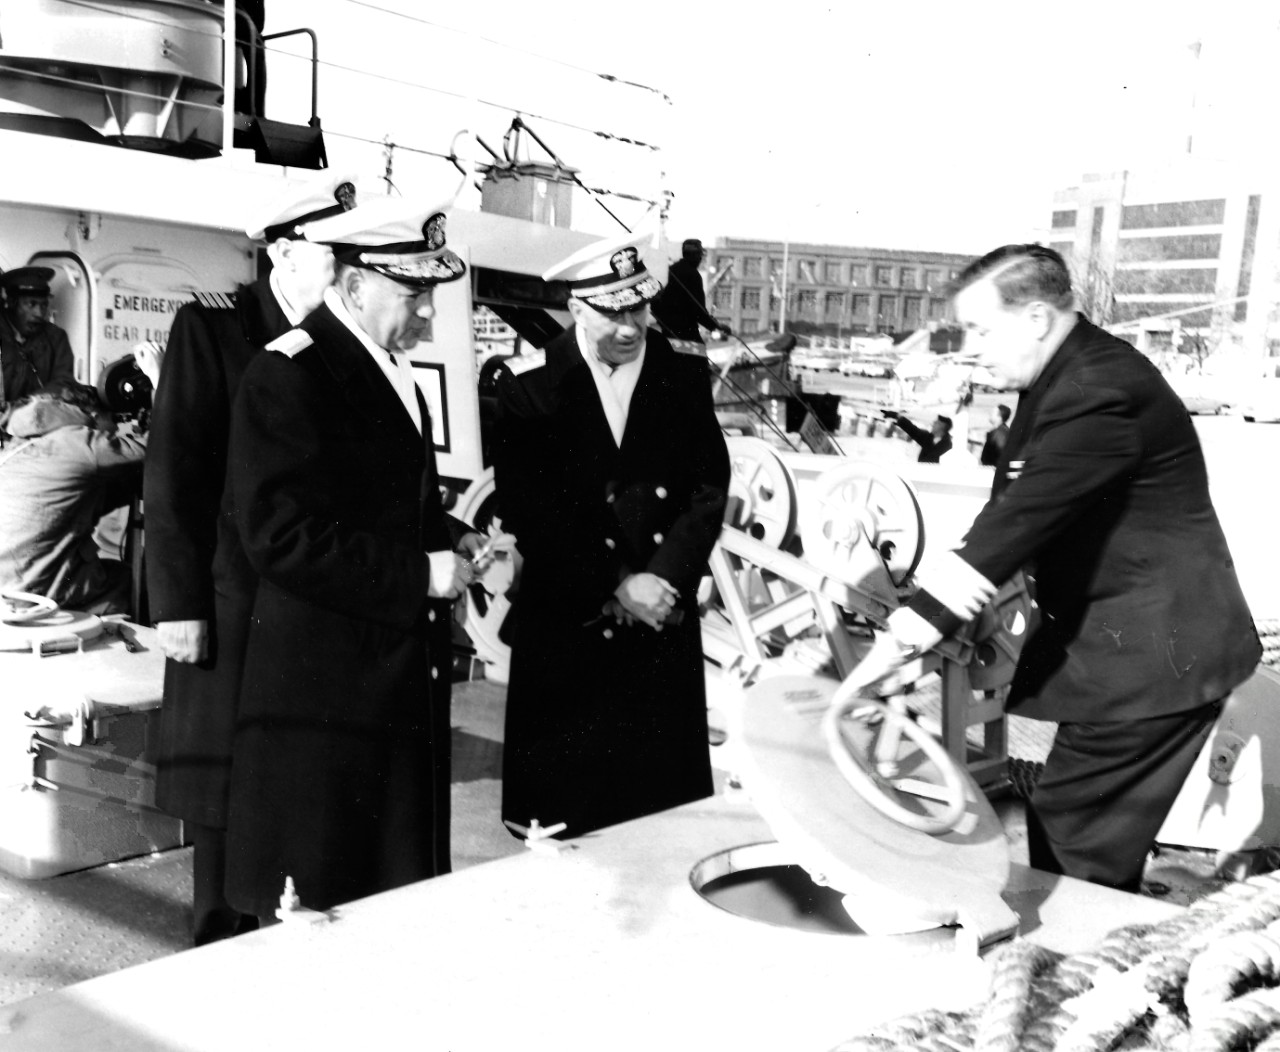 NMUSN-22:   USNS James. M. Gilliss (T-AGOR-4), December 1962.    Naval Historical Display Center’s Director, Captain Slade D. Cutter, USN, discusses with Vice Admiral Roy A. Gano, USN, Commander, Military Sea Transportation Service and Rear Admiral Edward C. Stephan, USN, the Chief Oceanographer of the Naval Oceanographic Office on board the oceanographic research ship.   National Museum of the U.S. Navy Photograph Collection.    